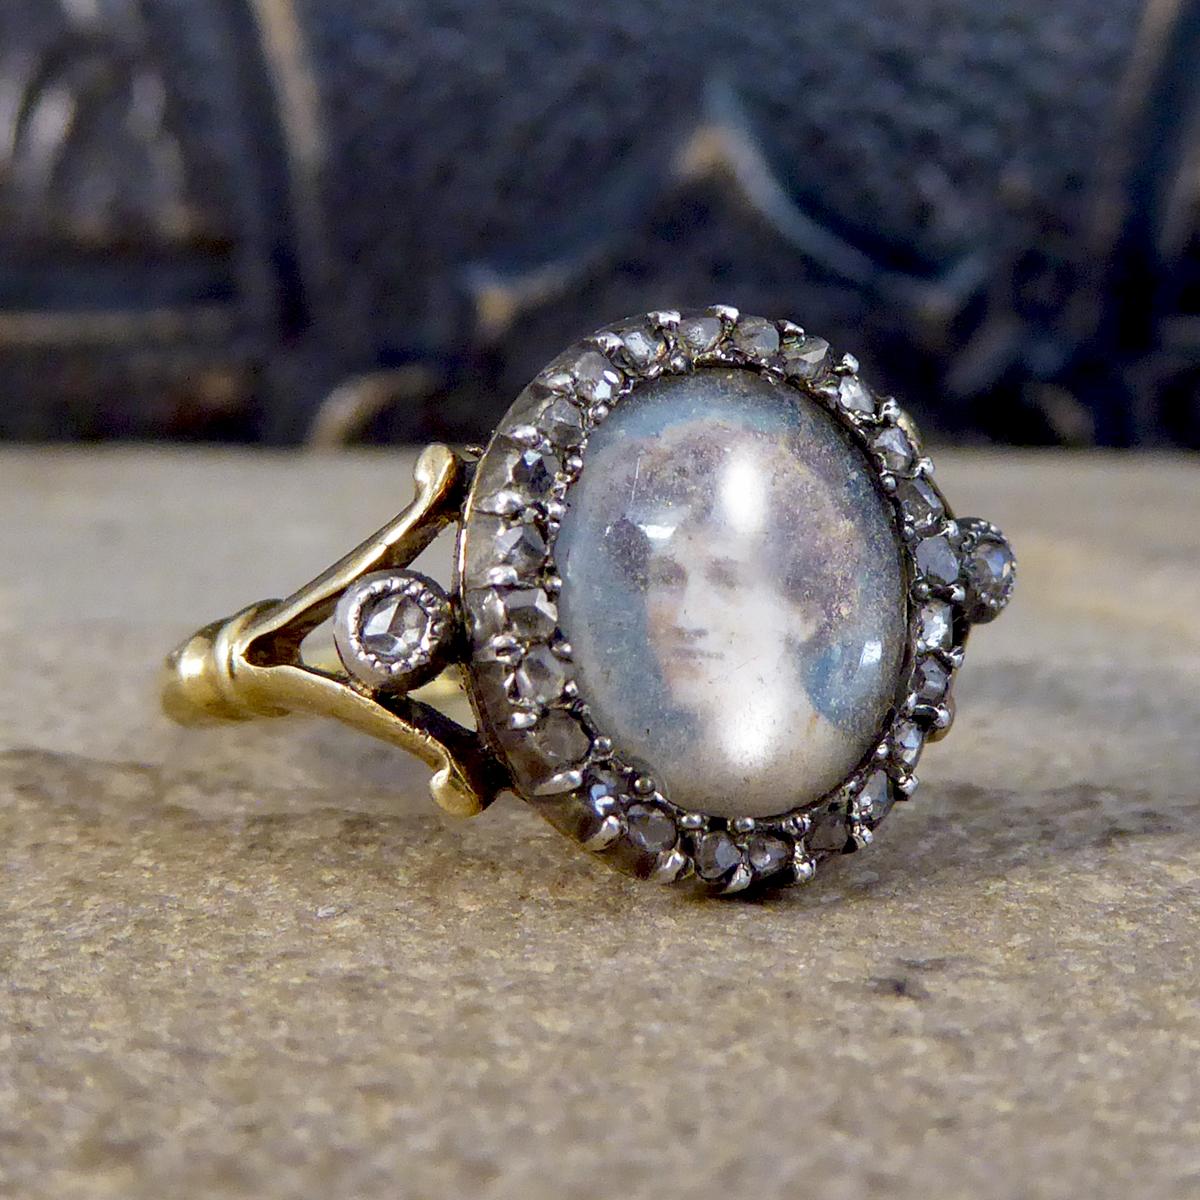 An exquisite and unusual ring for the Edwardian era. This wonderful piece has been crafted in 18ct Yellow Gold and Silver with an exceptional decorative design. In the centre of the ring is a hand painted portrait of a women and is remarkably